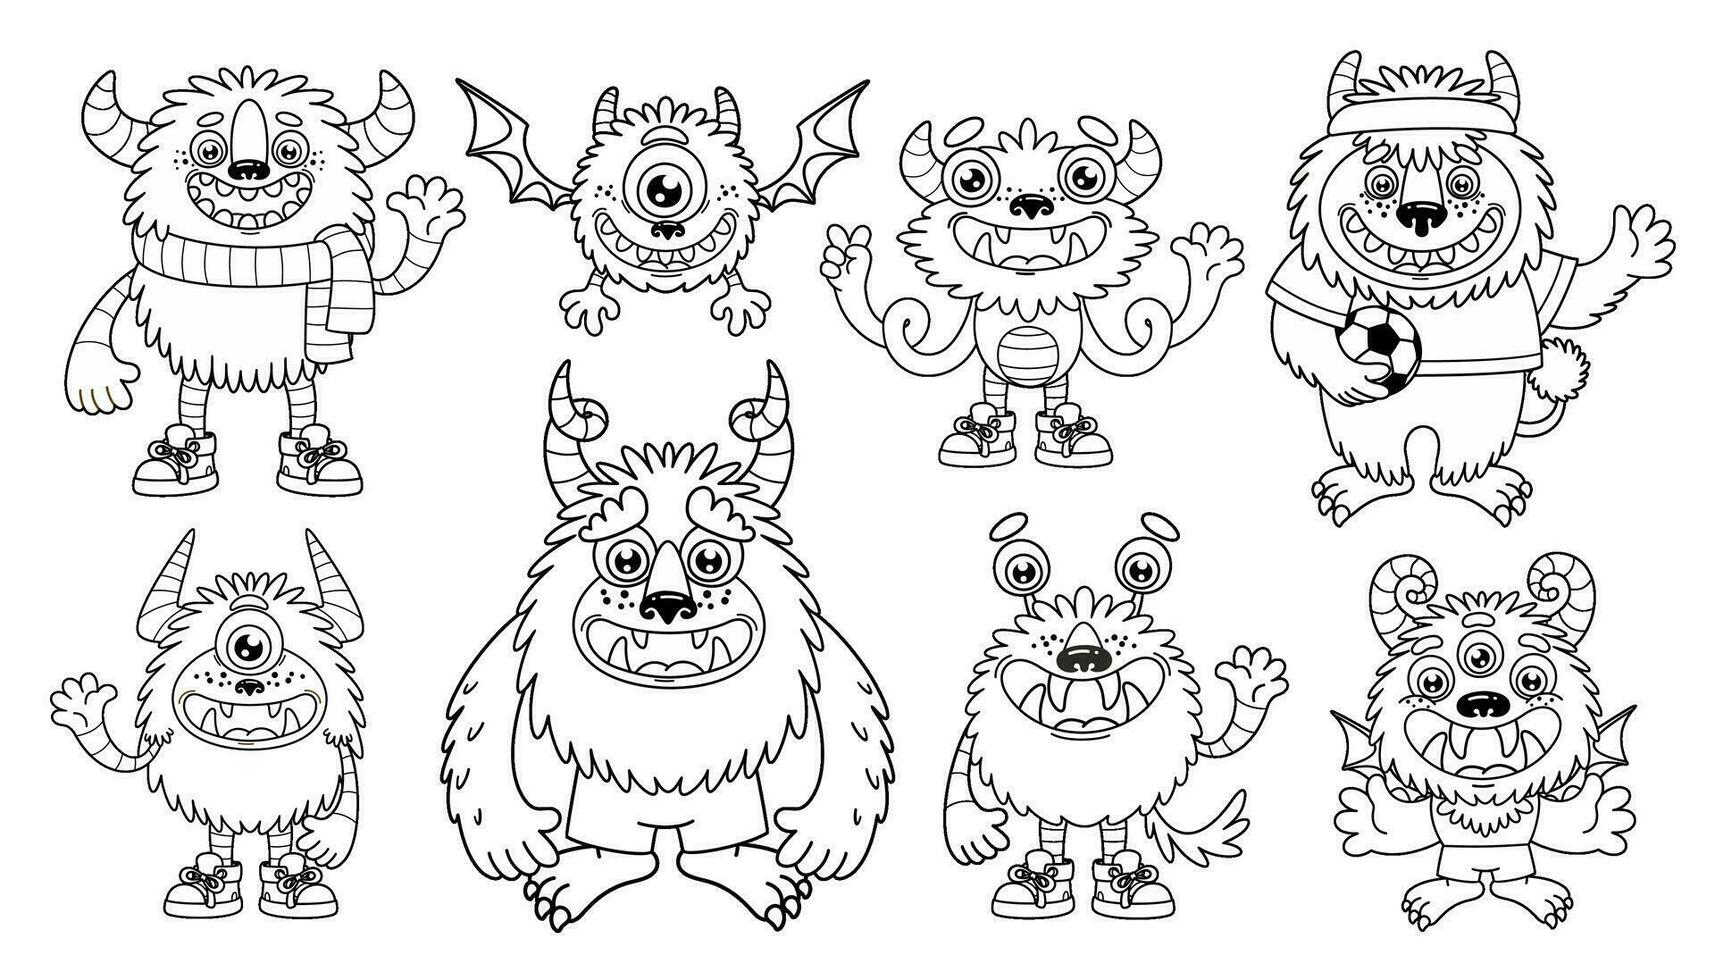 Contour of cartoon monsters. Outline vector illustrations funny mutants perfect for kids coloring page and Halloween themed design. Black and white set in childish style Isolated on white background.